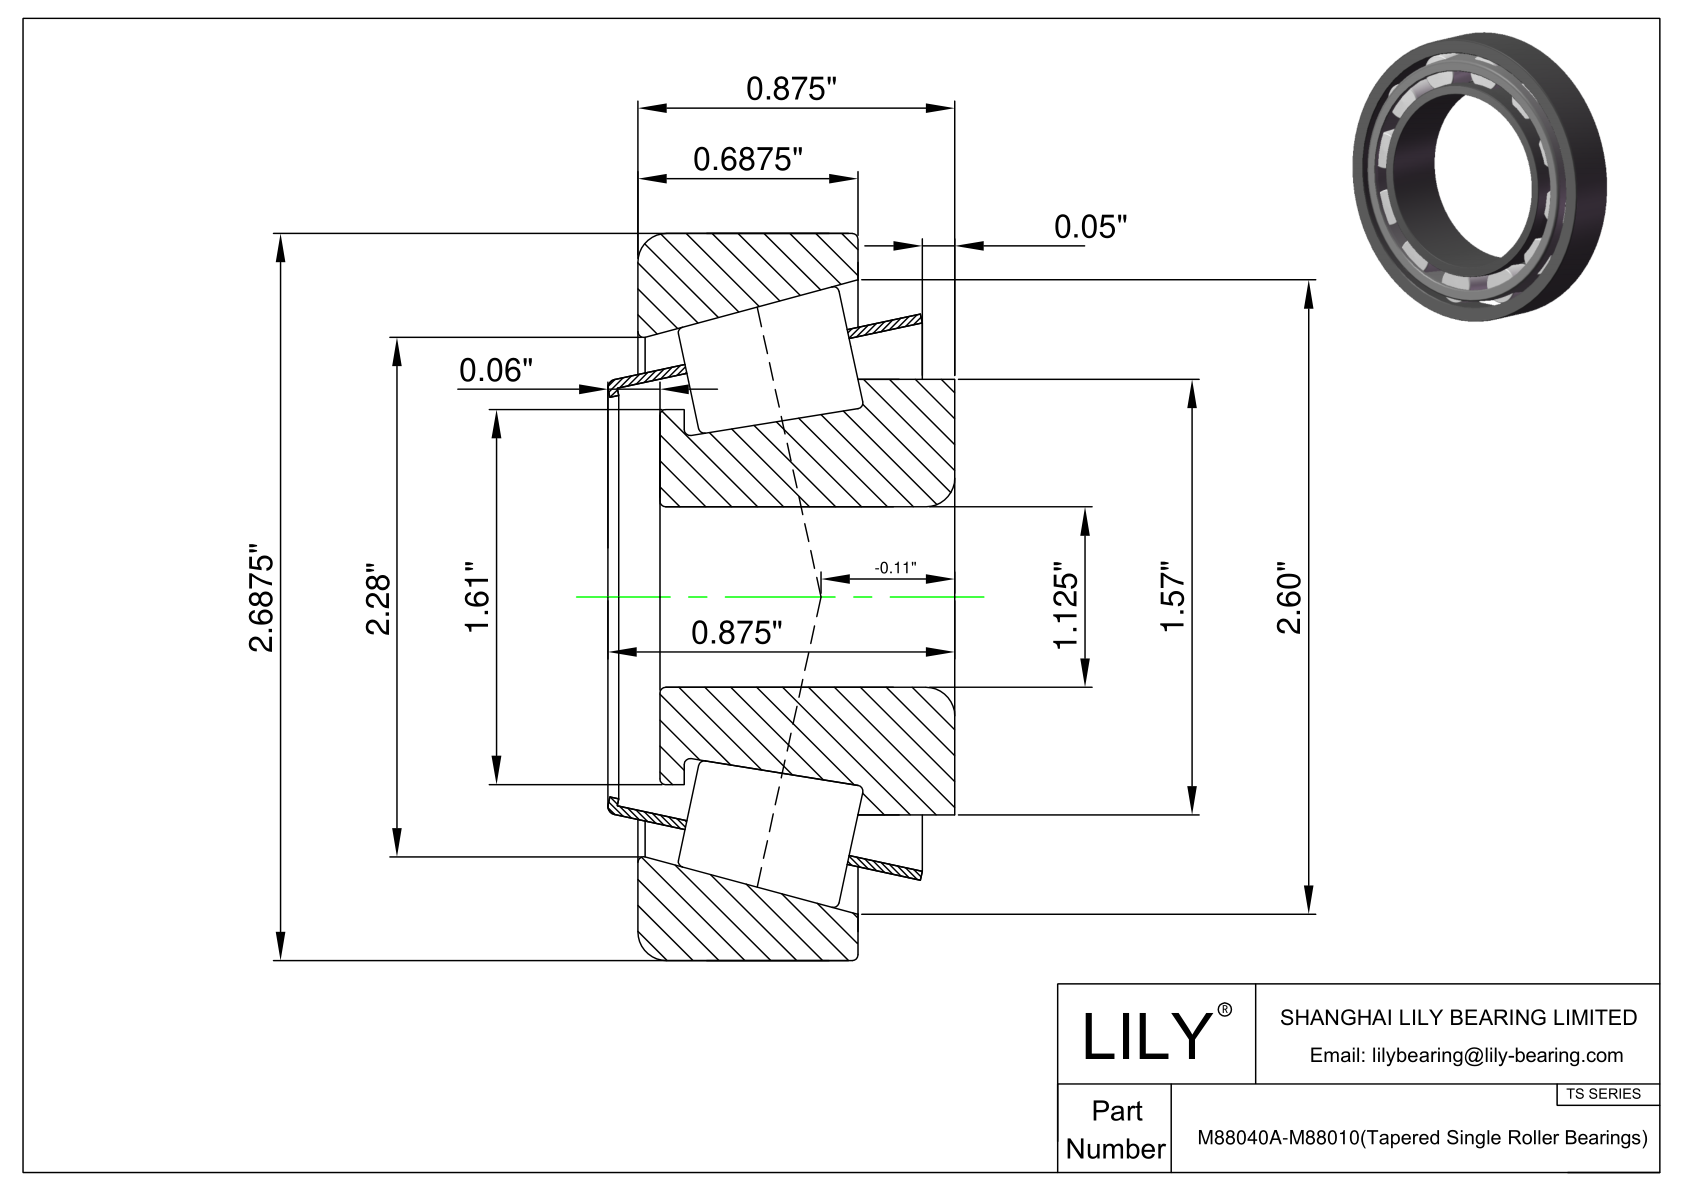 M88040A-M88010 TS (Tapered Single Roller Bearings) (Imperial) cad drawing